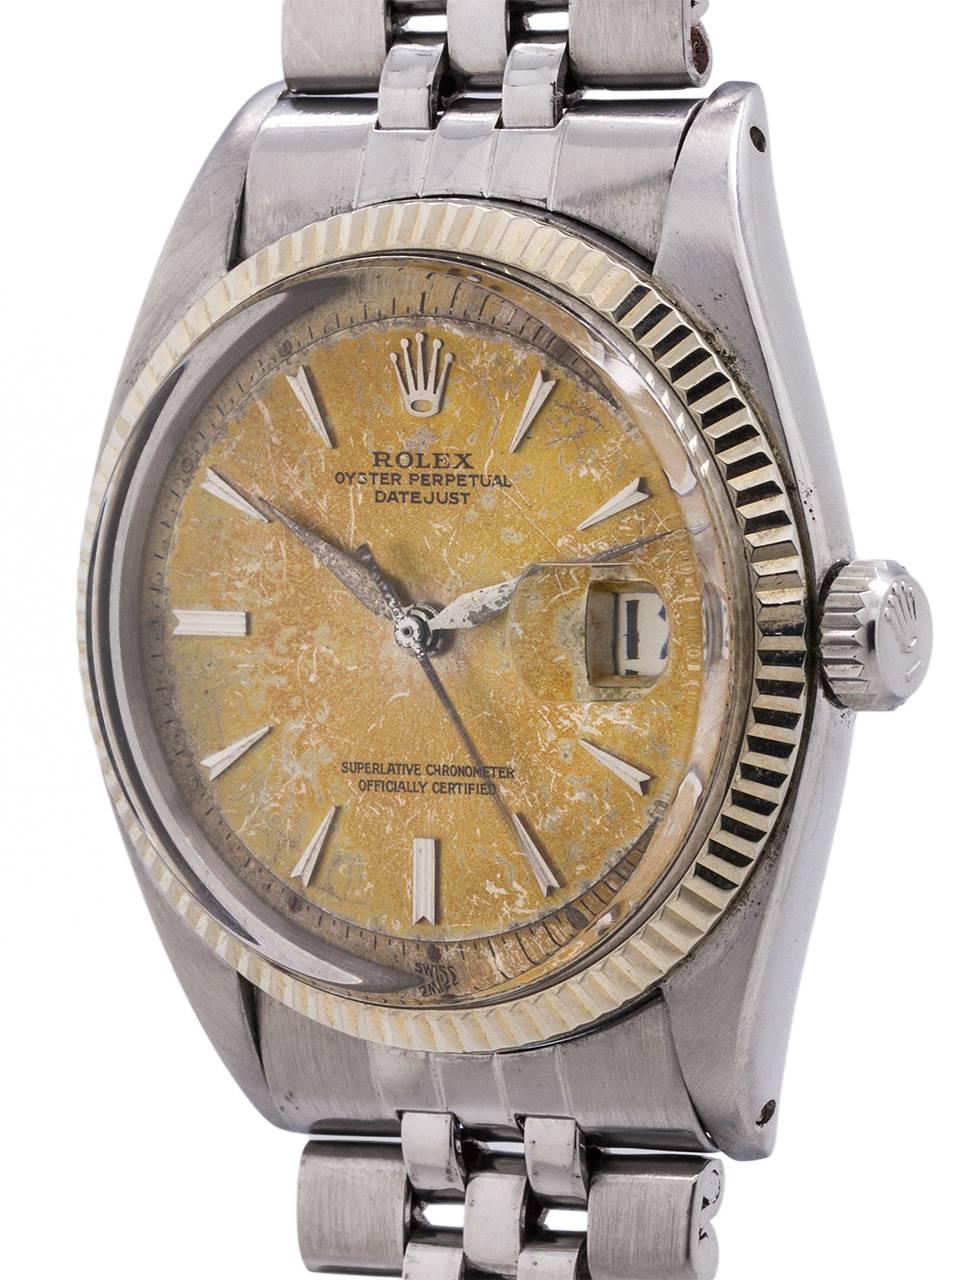 Rolex Stainless Steel Datejust Self Winding Wristwatch ref 1601, circa 1963 In Excellent Condition For Sale In West Hollywood, CA